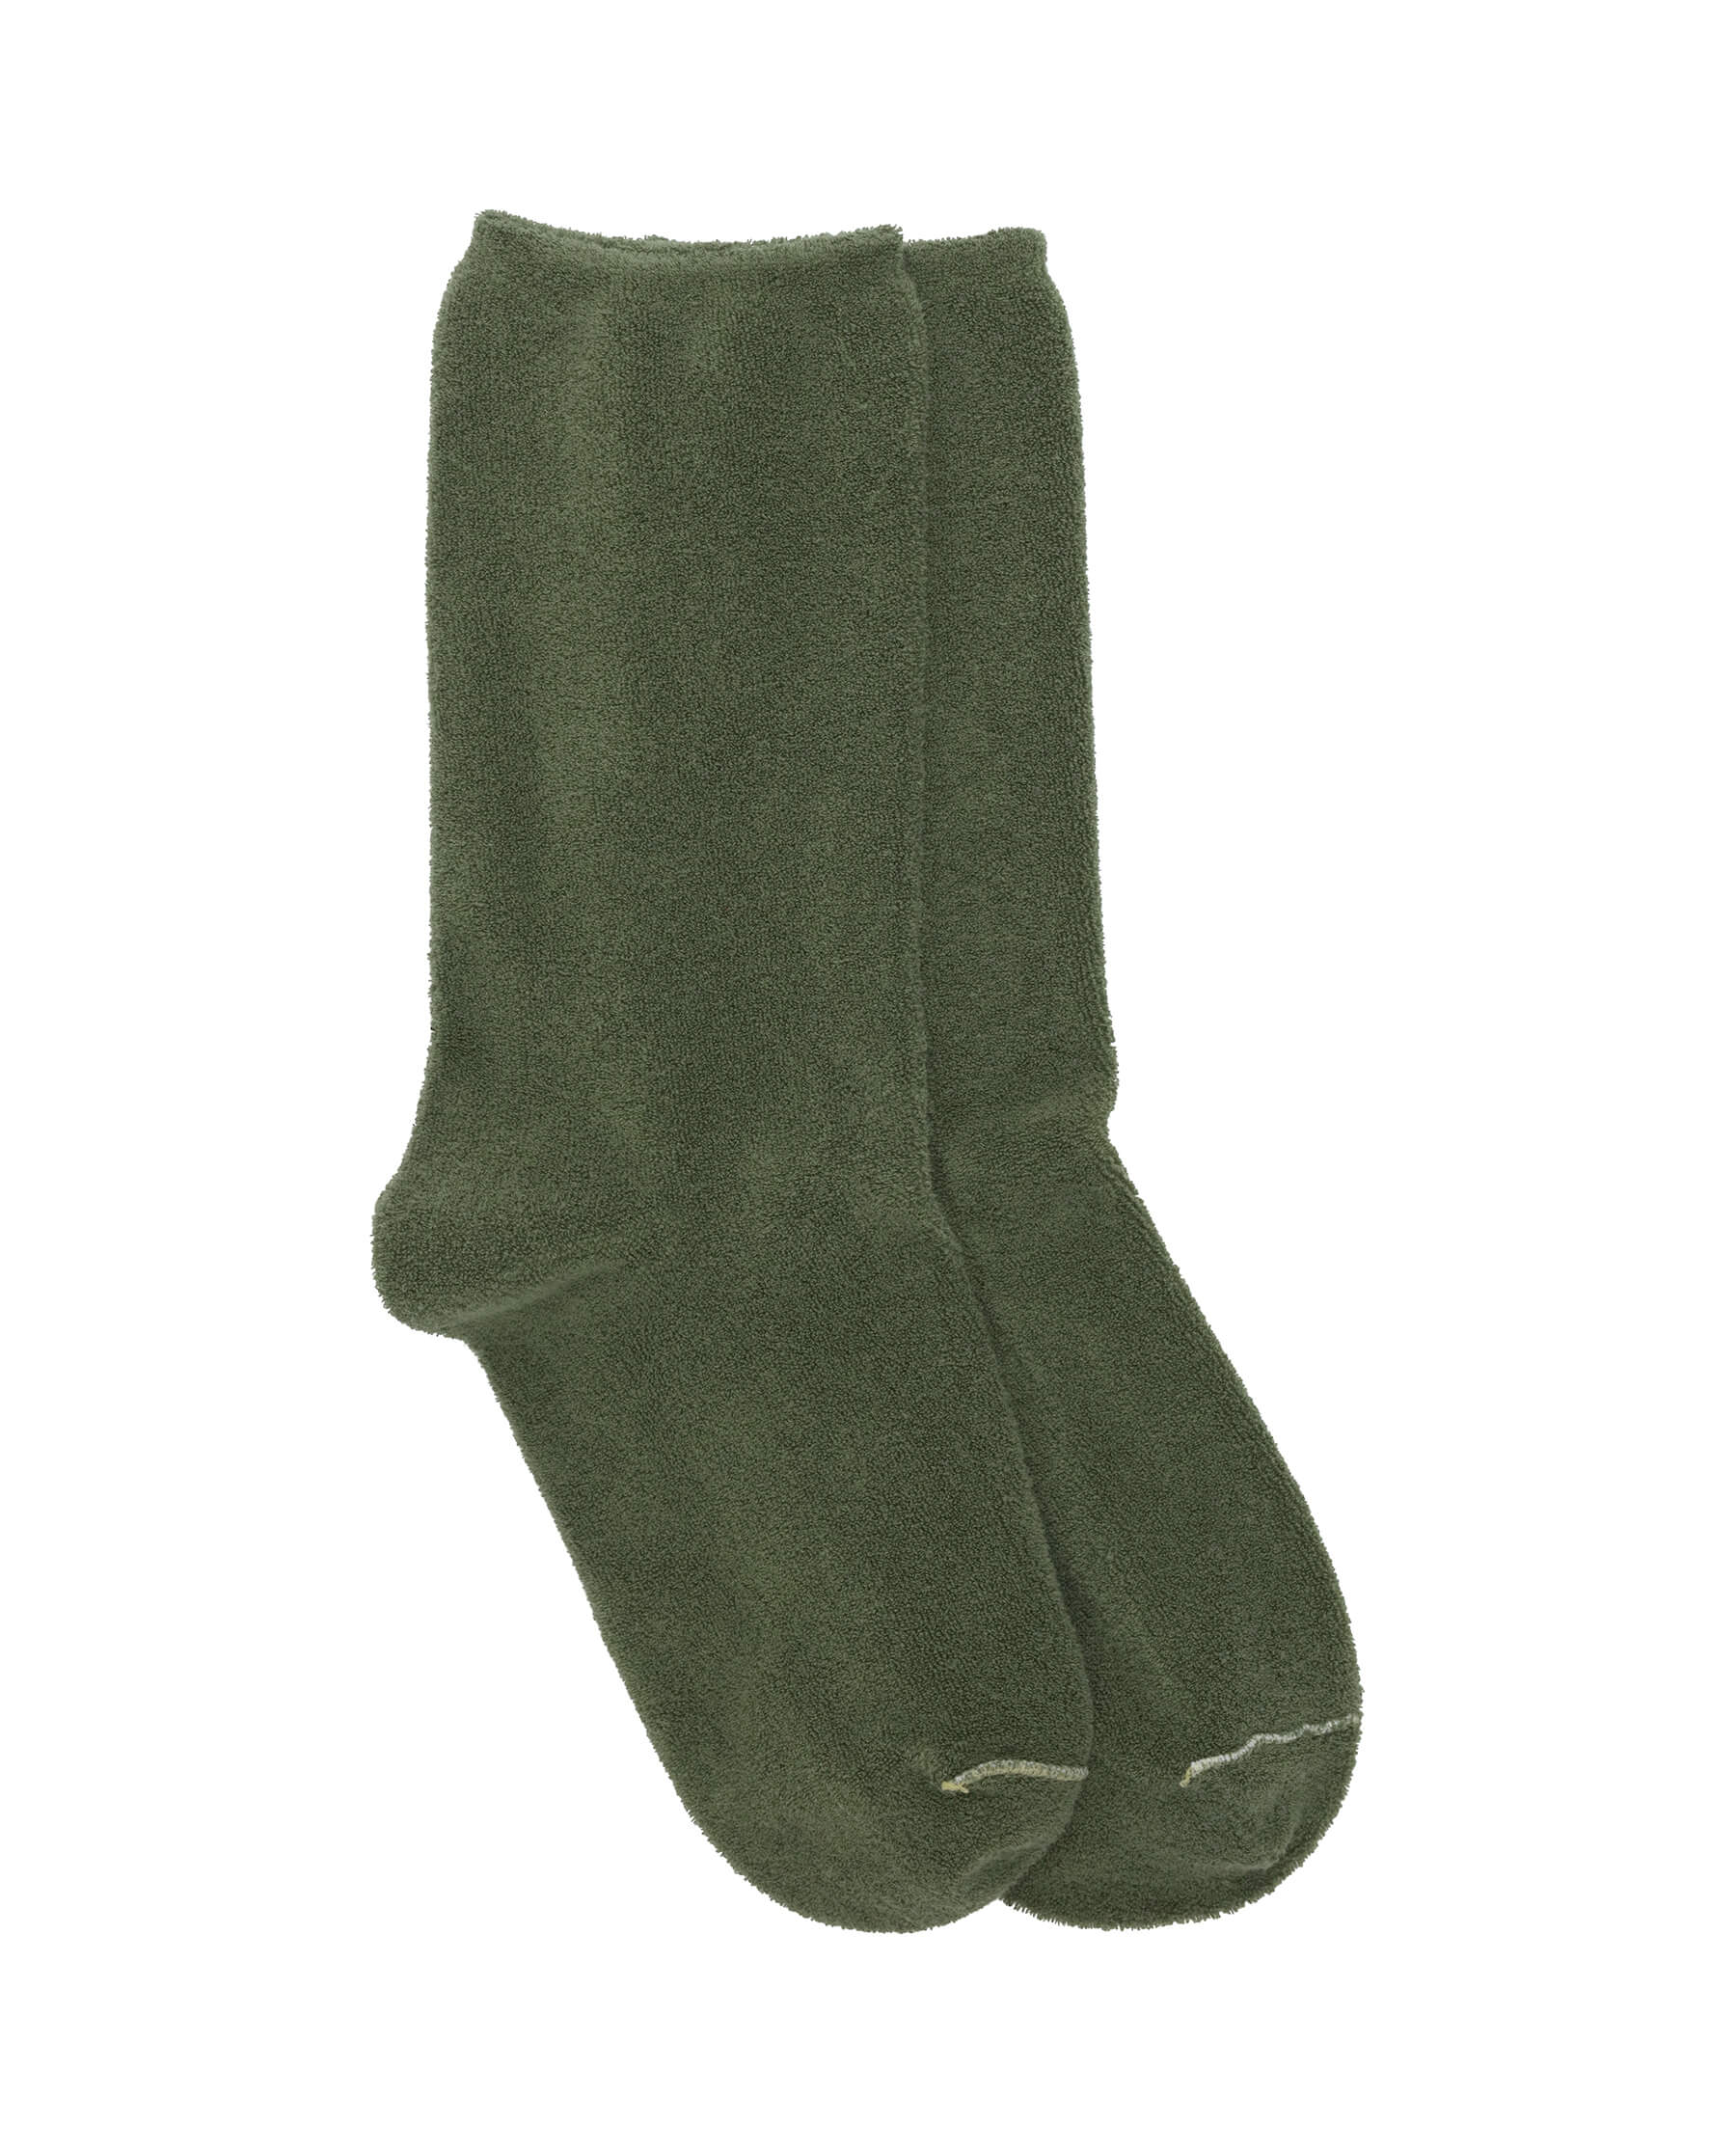 The Microterry Sock. -- Army